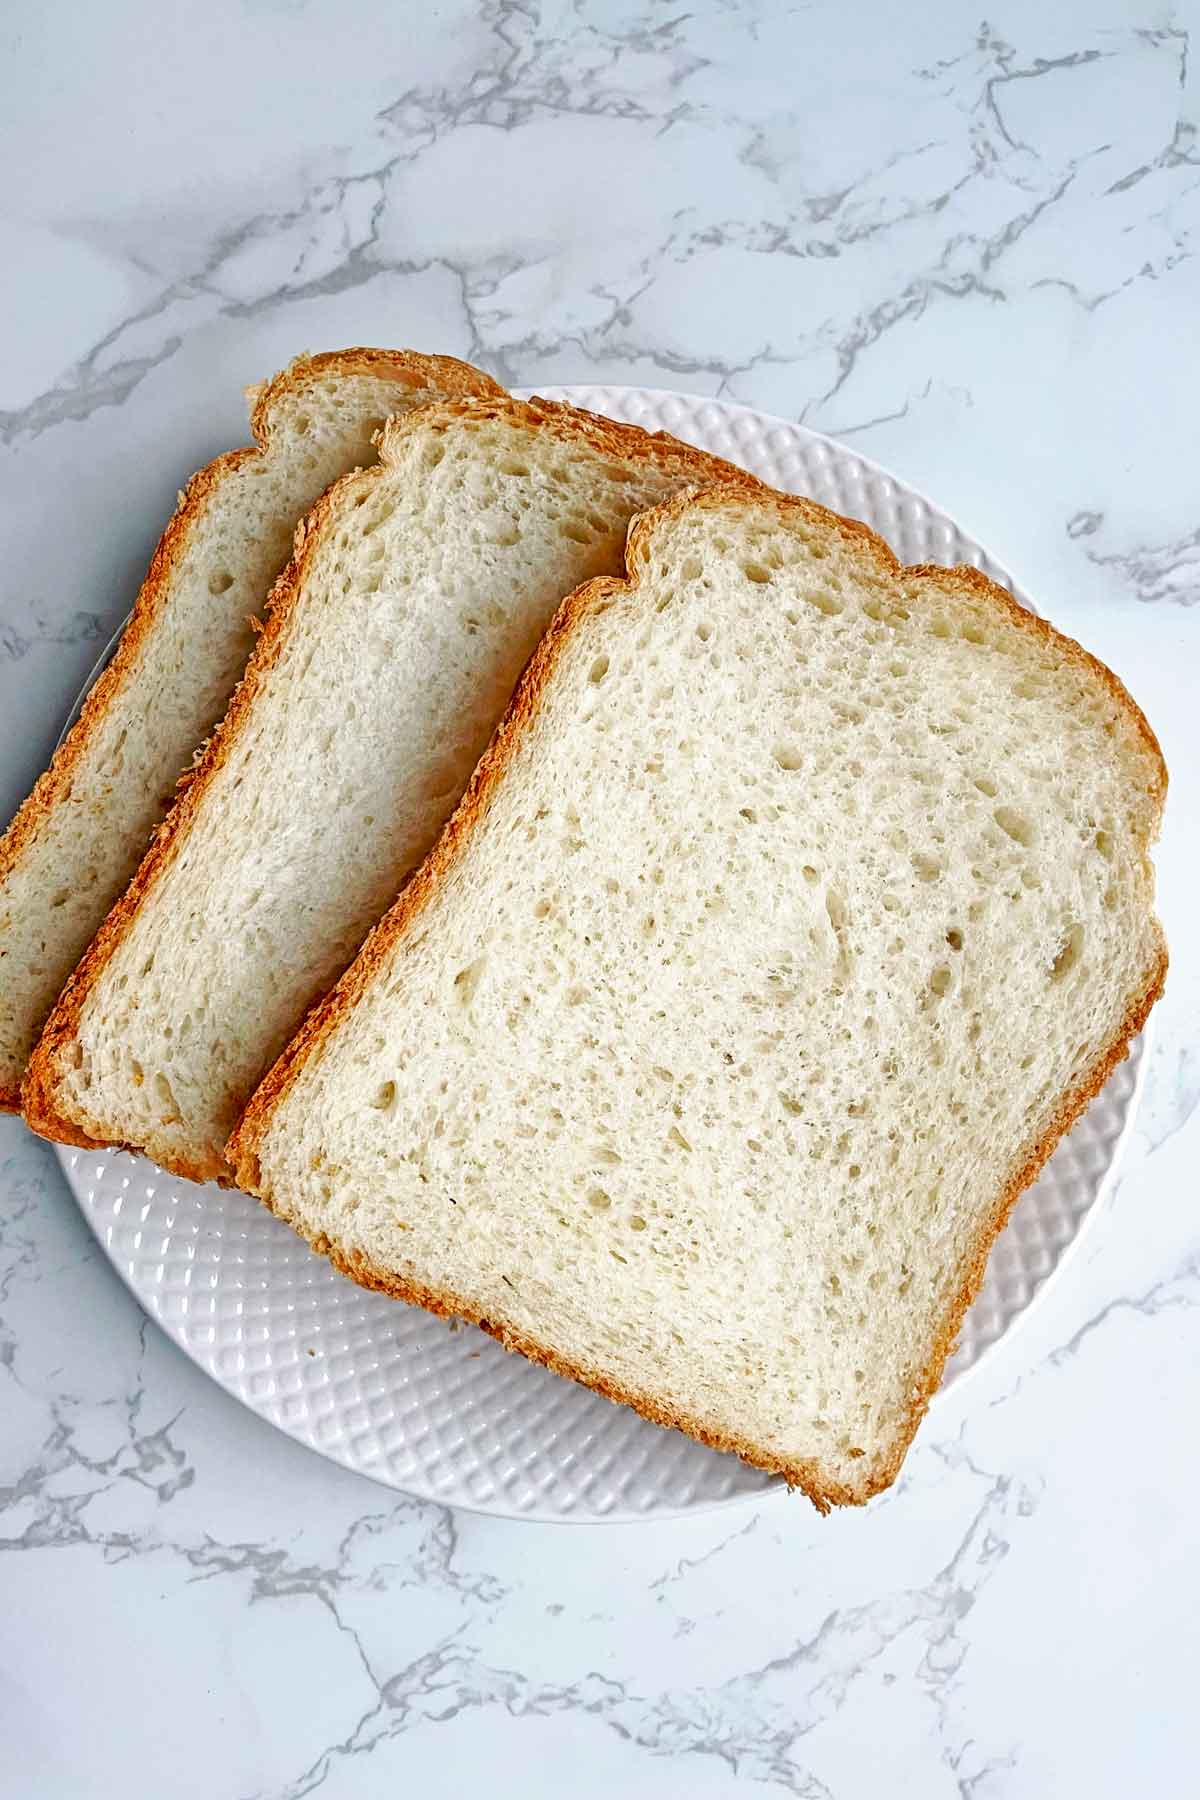 3 bread slices in a plate.